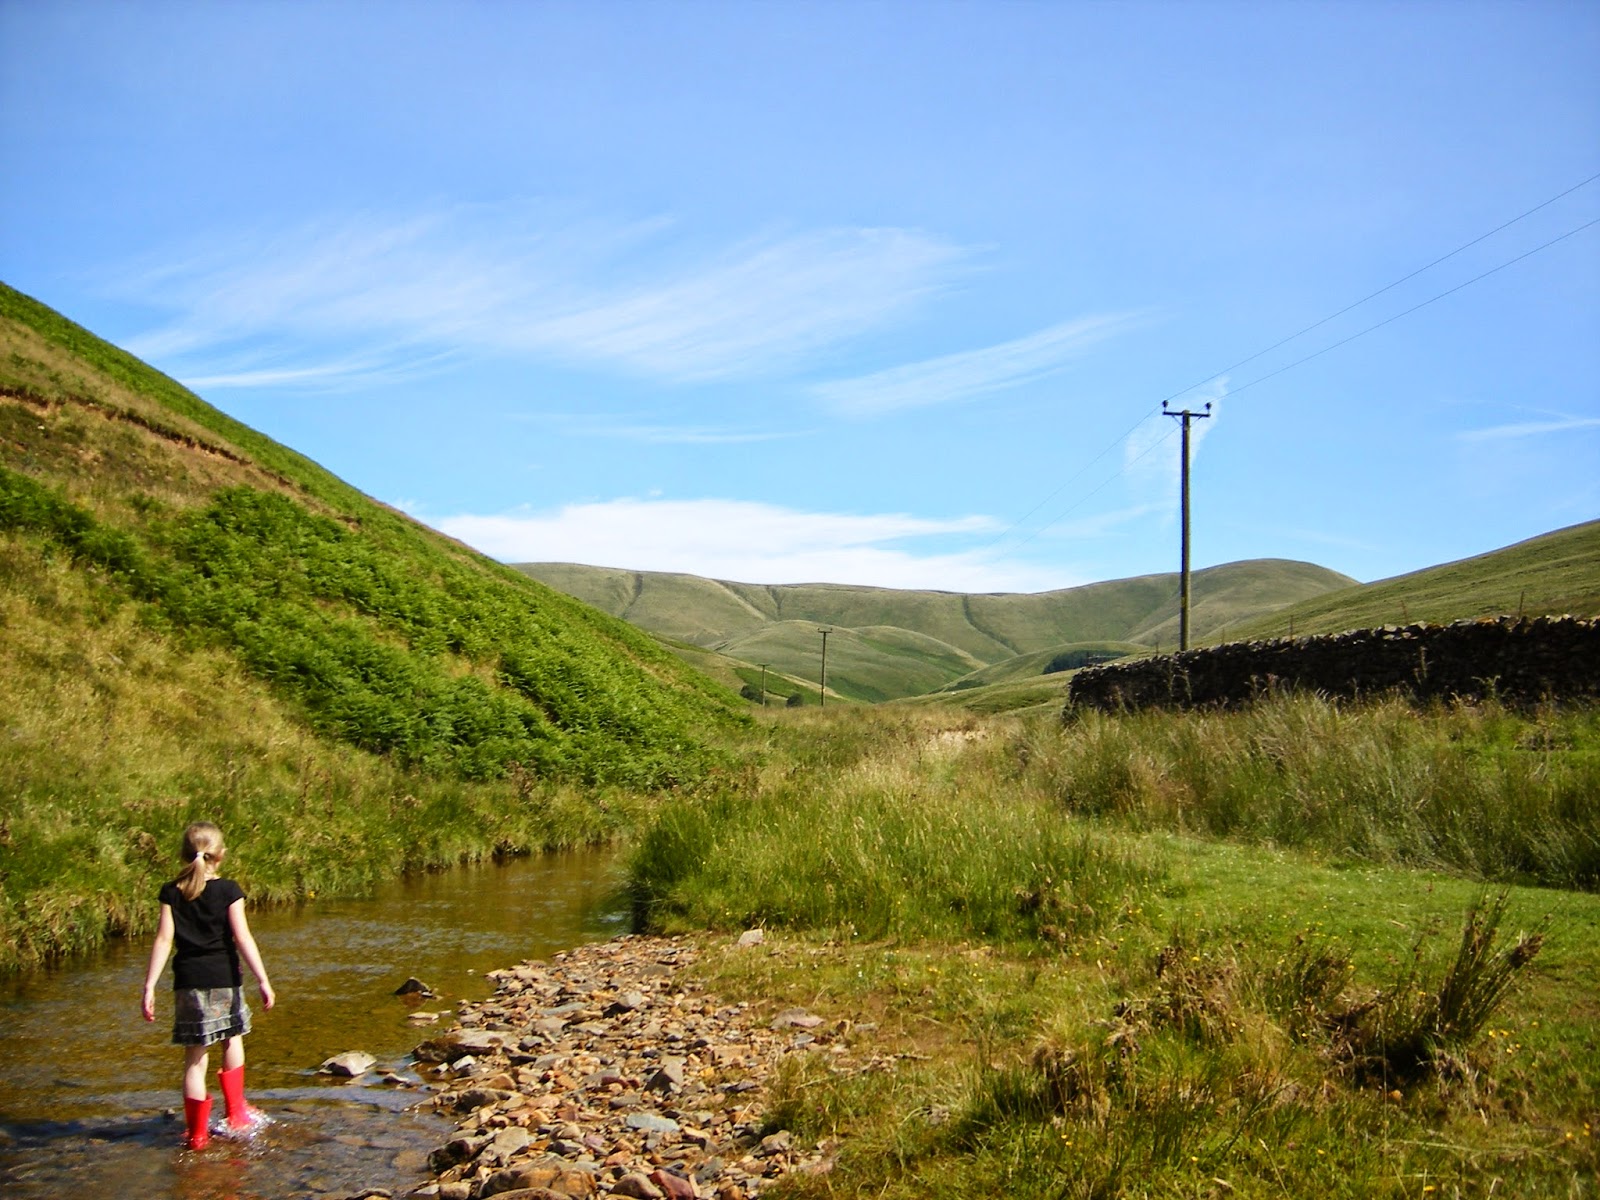 country landscape with hills and river/ stream in summer in scotland